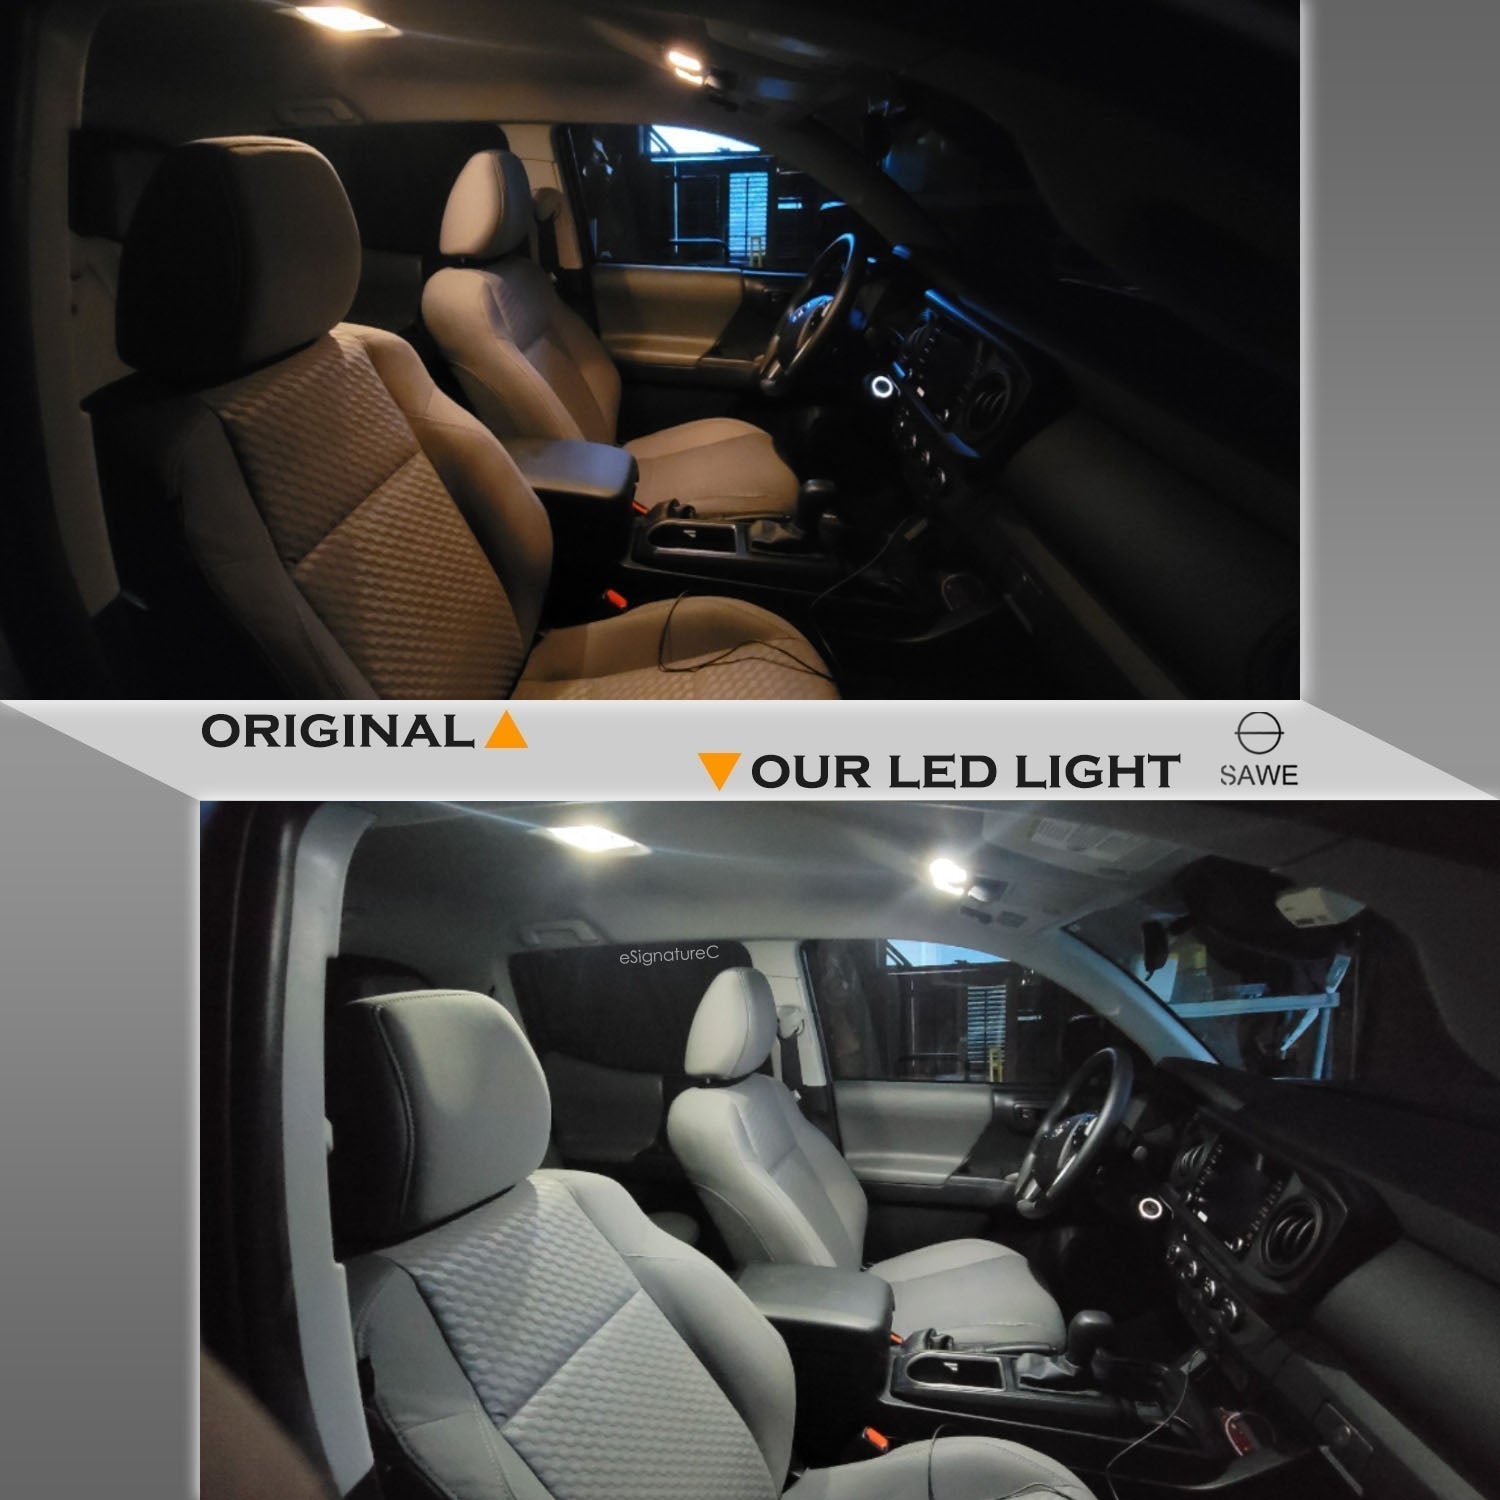 For Ford Expedition Interior LED Lights - Dome & Map Light Bulbs Package Kit for 2003 - 2017 - White